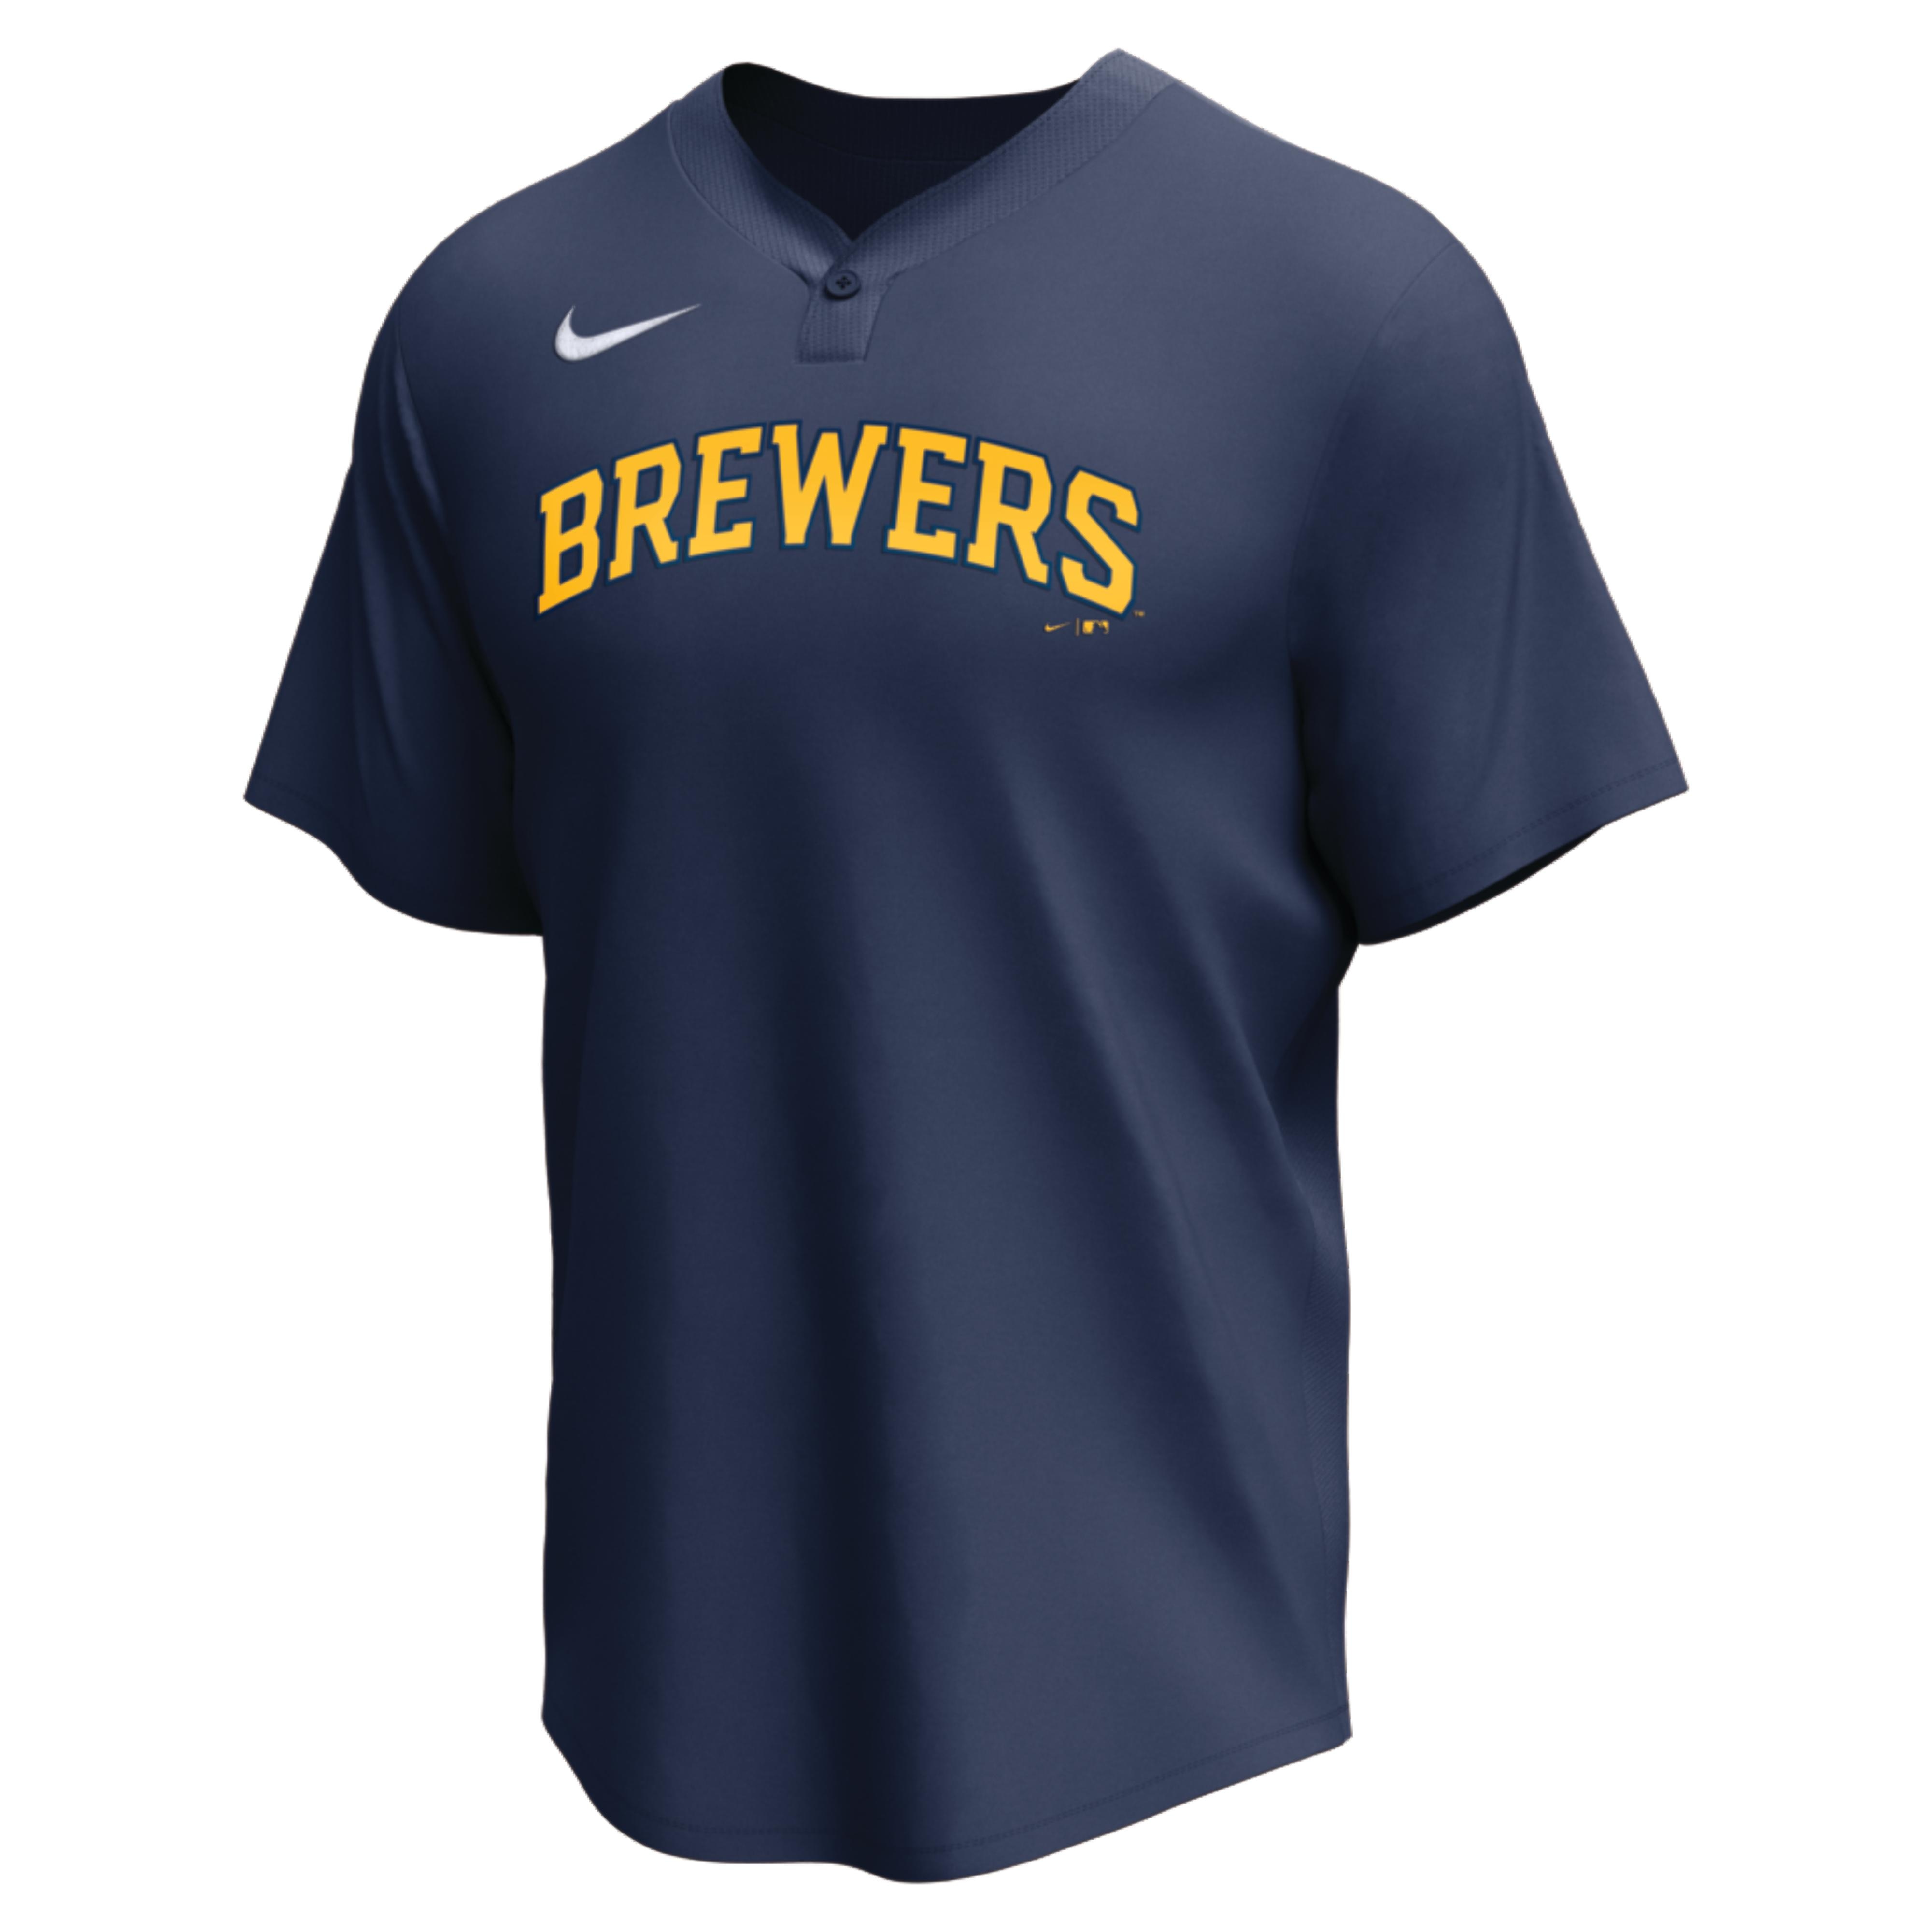 Brewers Uniforms 🍺 on X: New uniforms for the @Brewers #Brewers  #GloveStory #ThisIsMyCrew #BrewCrew  / X